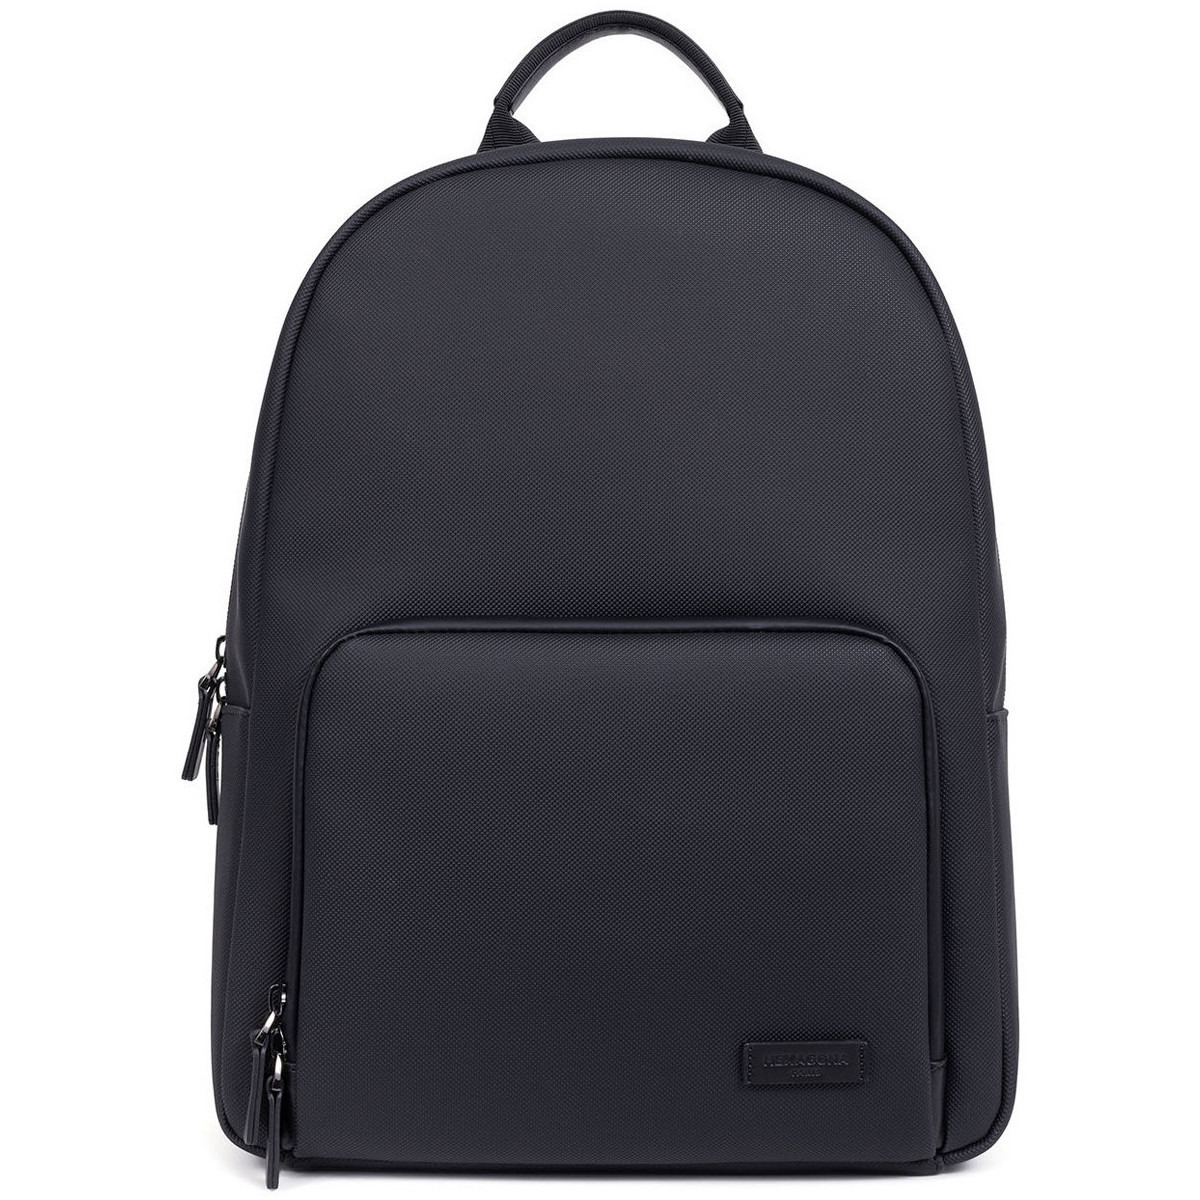 Gents Black Backpack by Spartoo GOOFASH